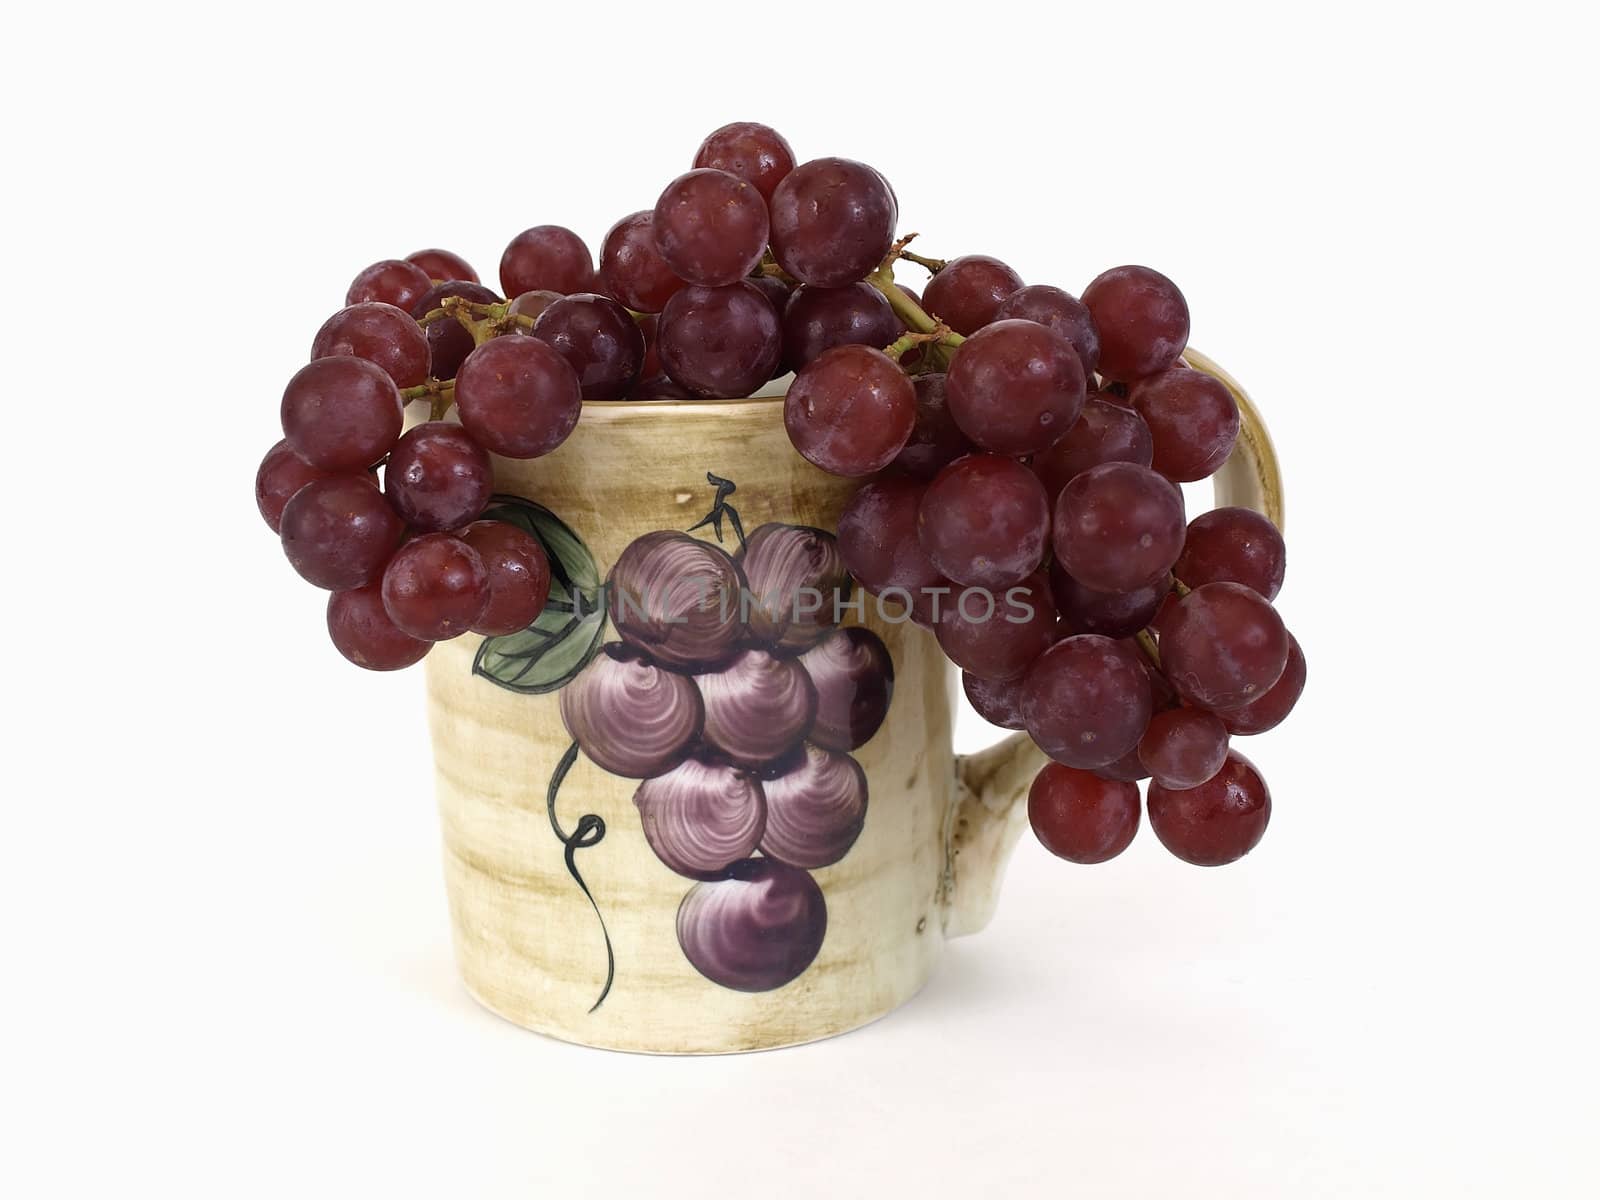 Red seedless grapes draped in a ceramic coffee cup with a grape design on it. Over white.